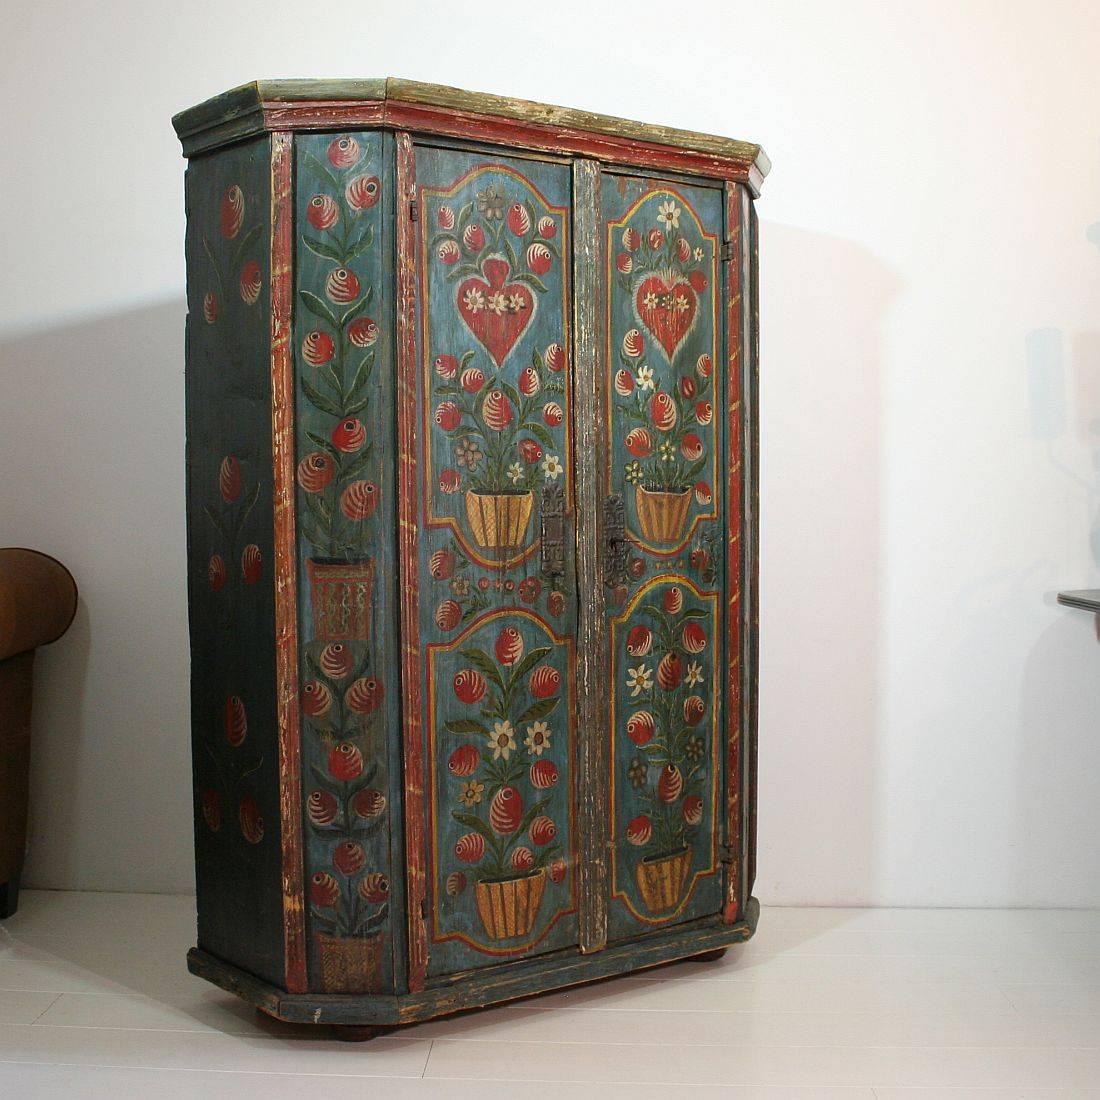 Beautiful painted 18th century French wedding armoire with beautiful painted bouquets, hearts and iron hinges, wood pegs. Alsace, France 18th century, Weathered, small losses and old repairs. Armoire is from the 18th century, paint is from the 19th